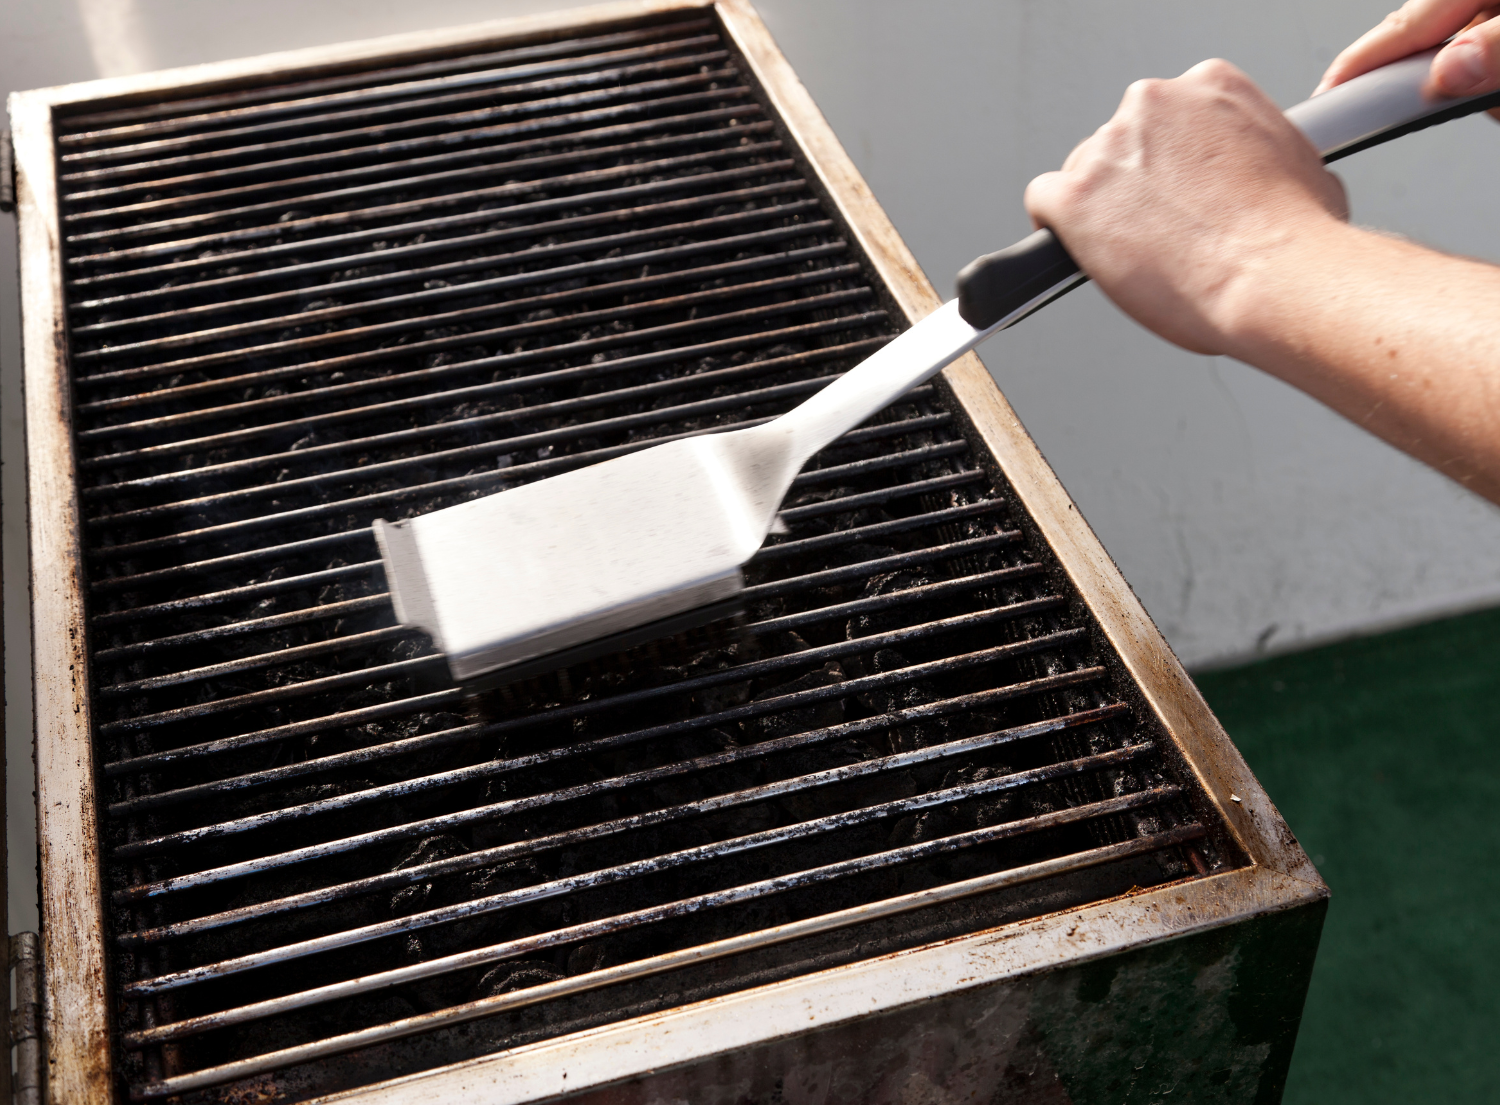 a dirty grill being cleaned with a metal scrubbing brush